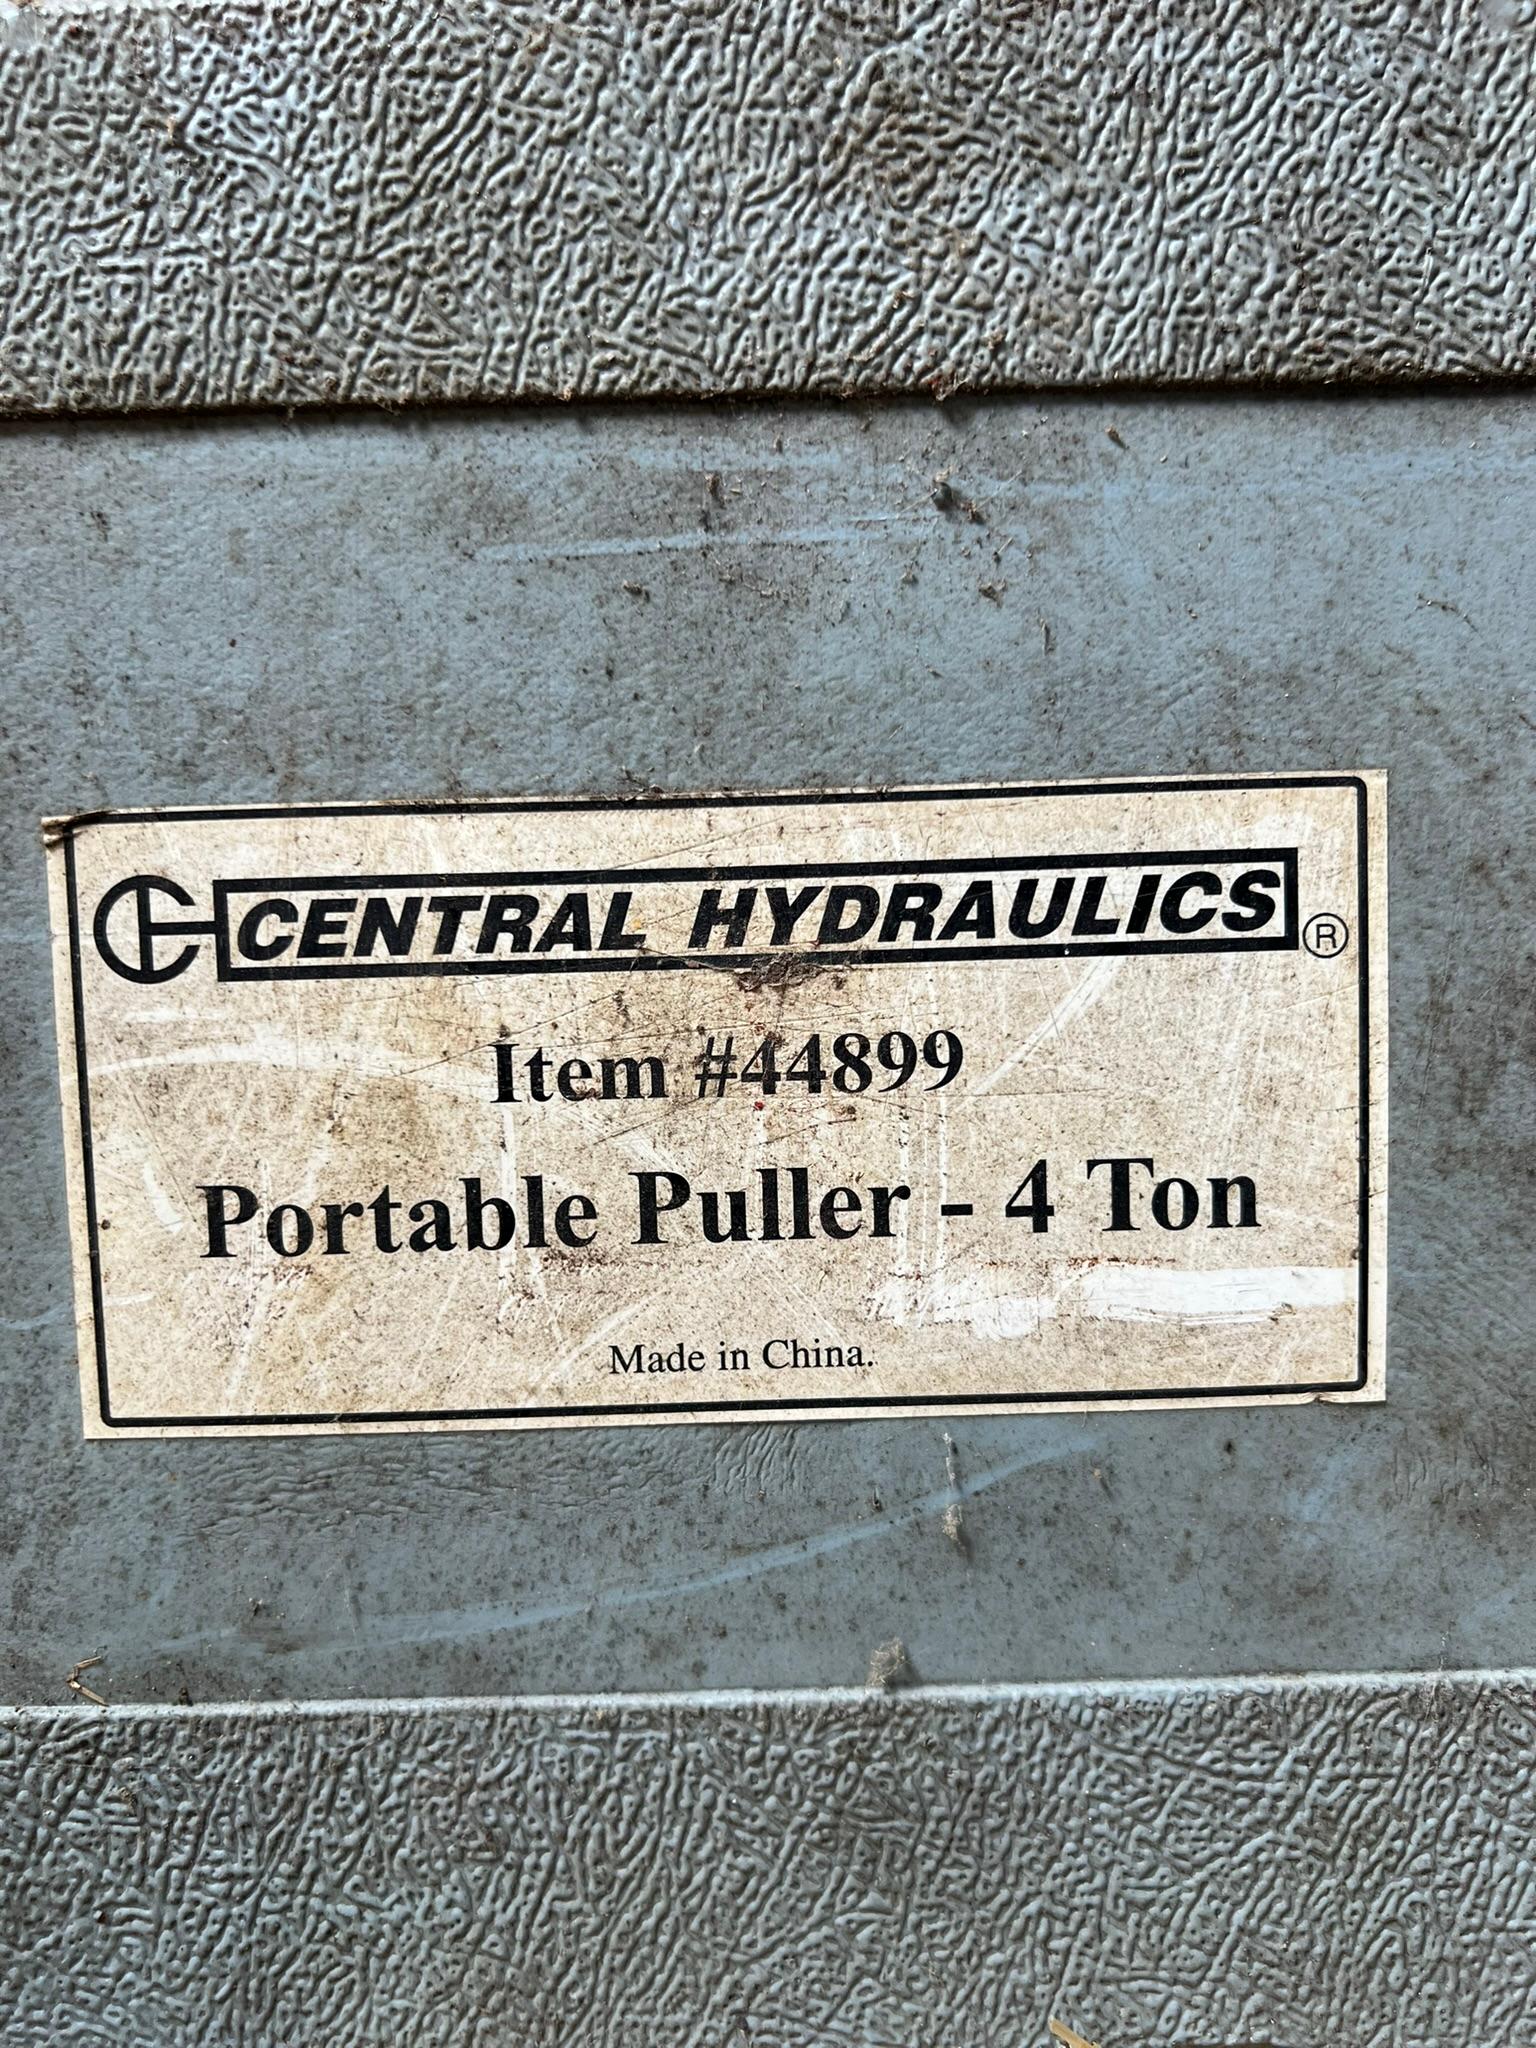 Central Hydraulics 4 Ton Portable Puller